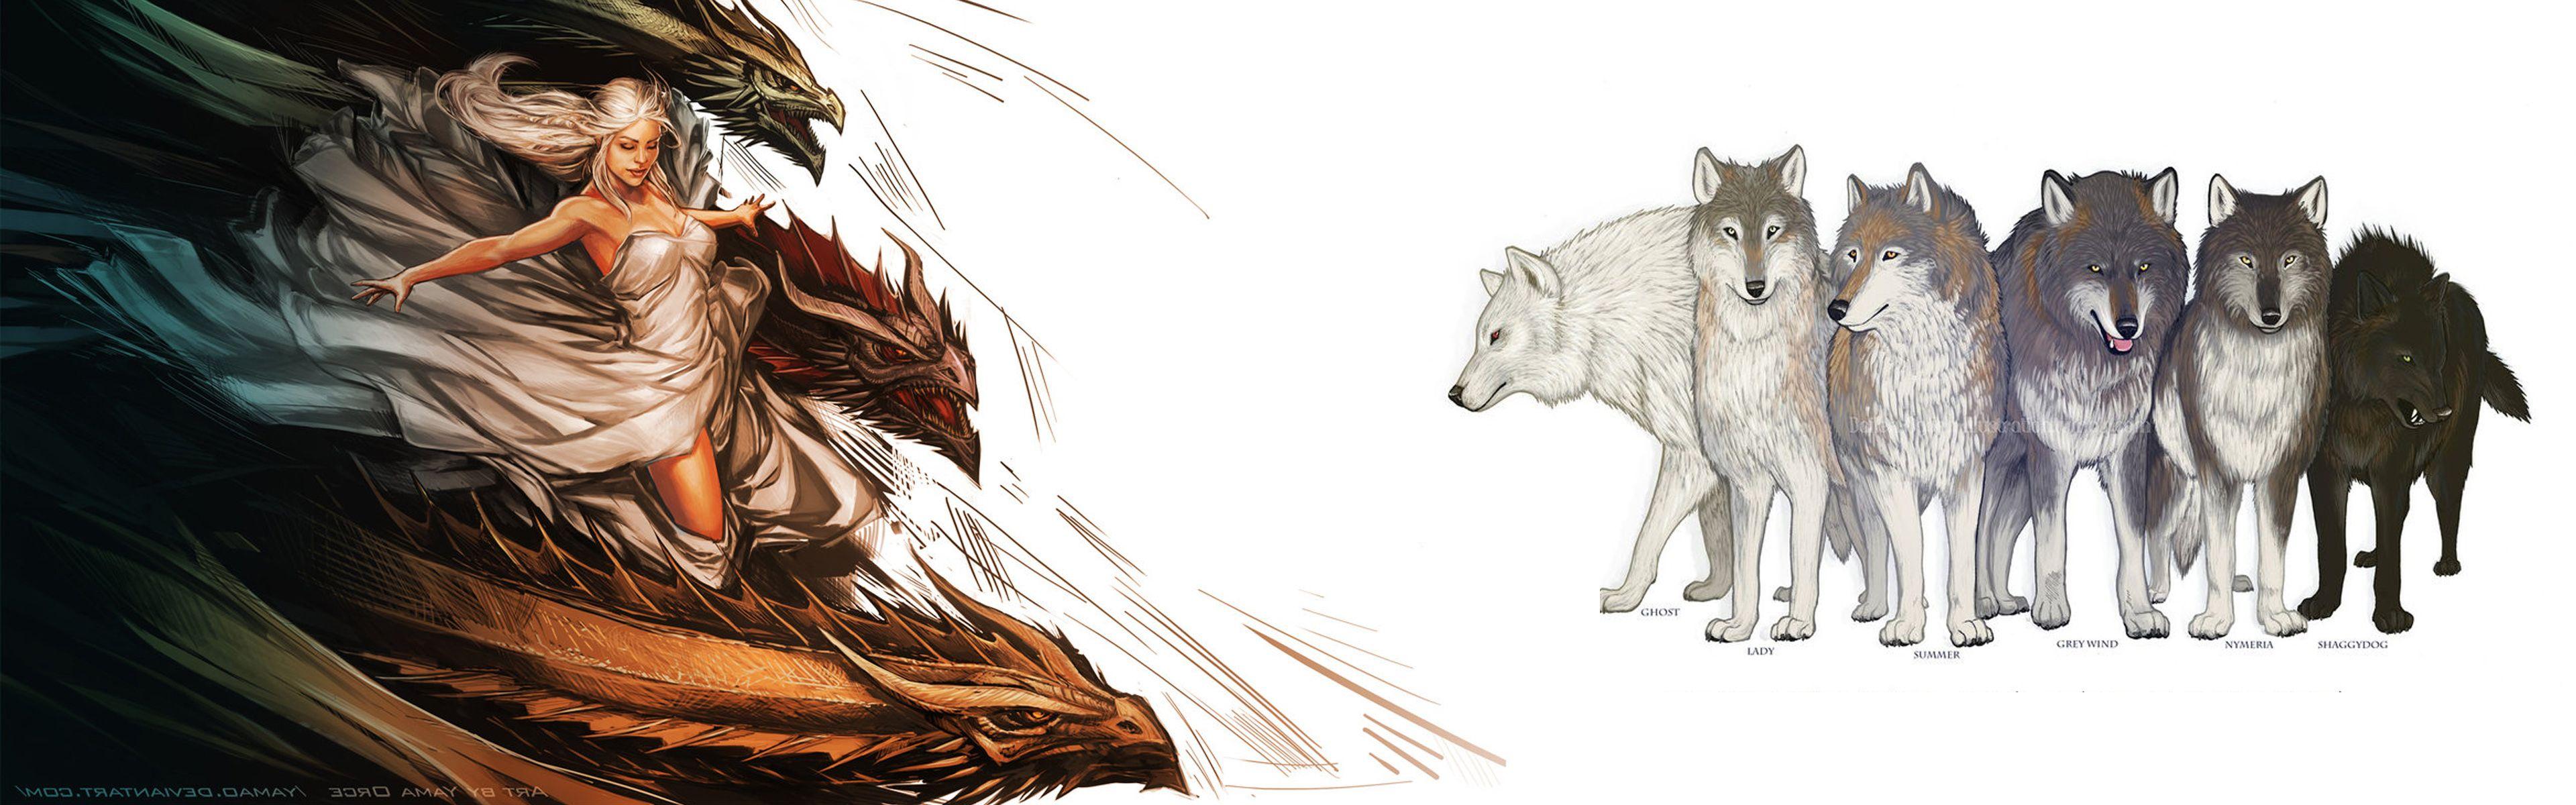 Dragons and Dire Wolves. Dire wolf, Wallpaper, Designer